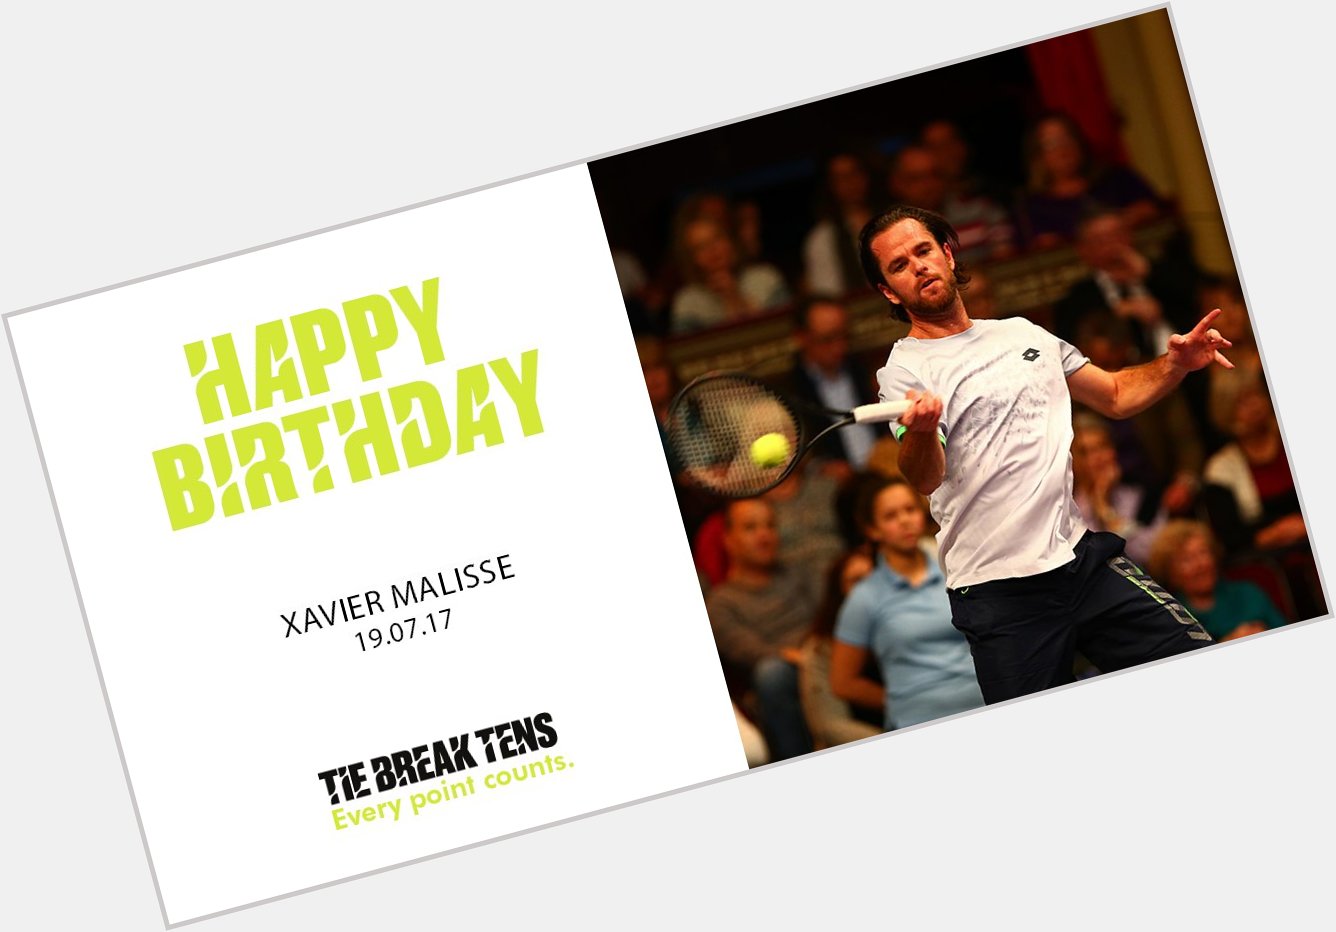  Happy Birthday, to our competitor Xavier Malisse! 